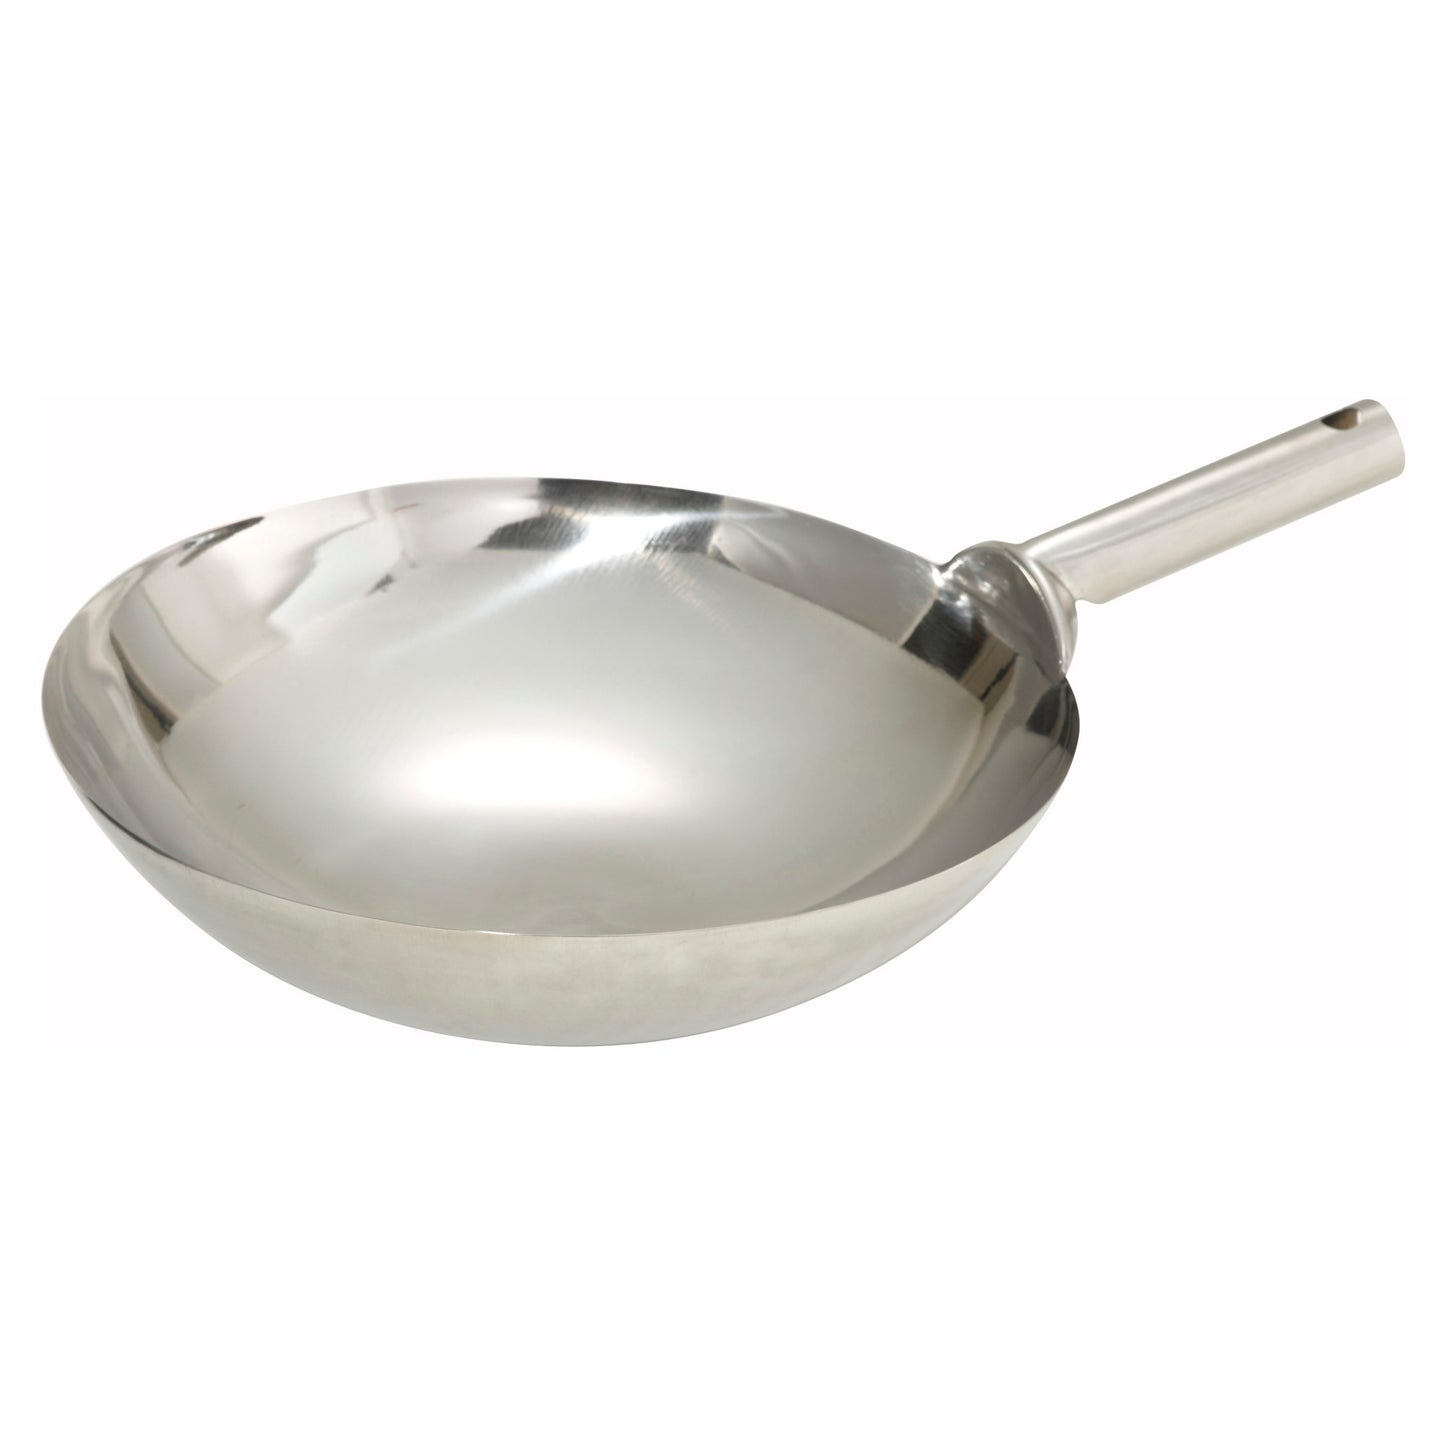 WOK-16W - Stainless Steel Chinese Wok - 16", Welded